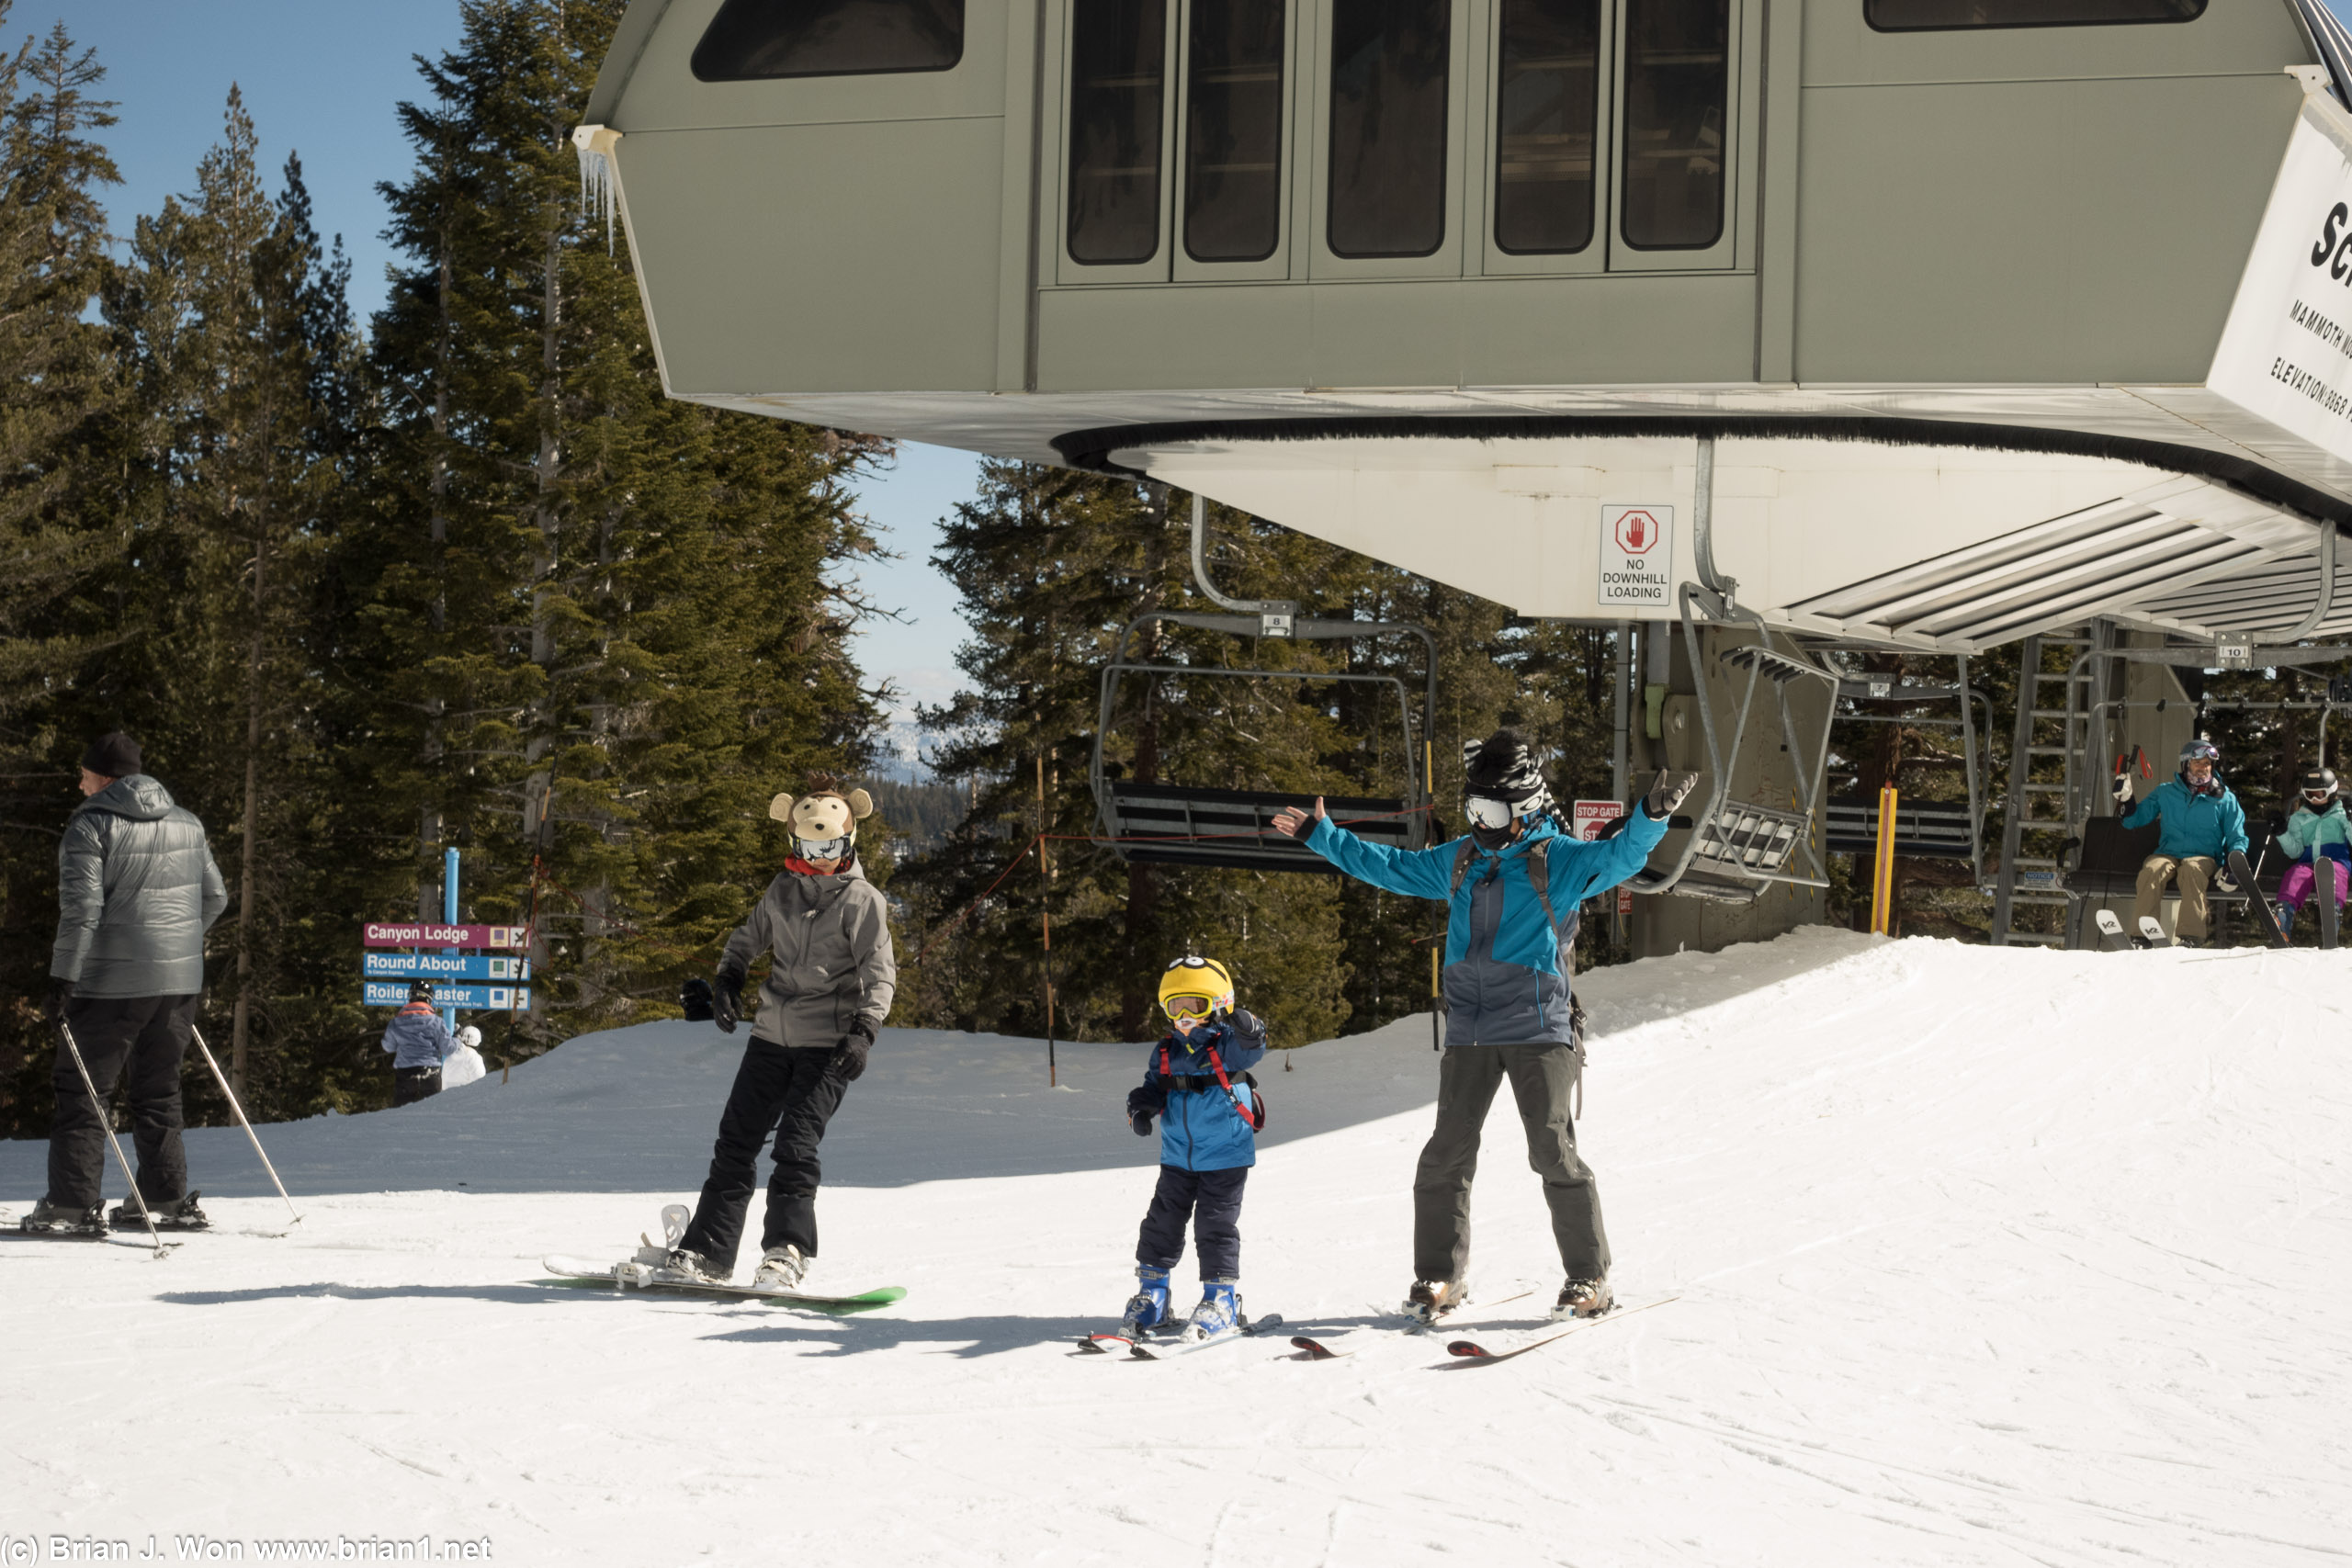 Family time on the slopes.